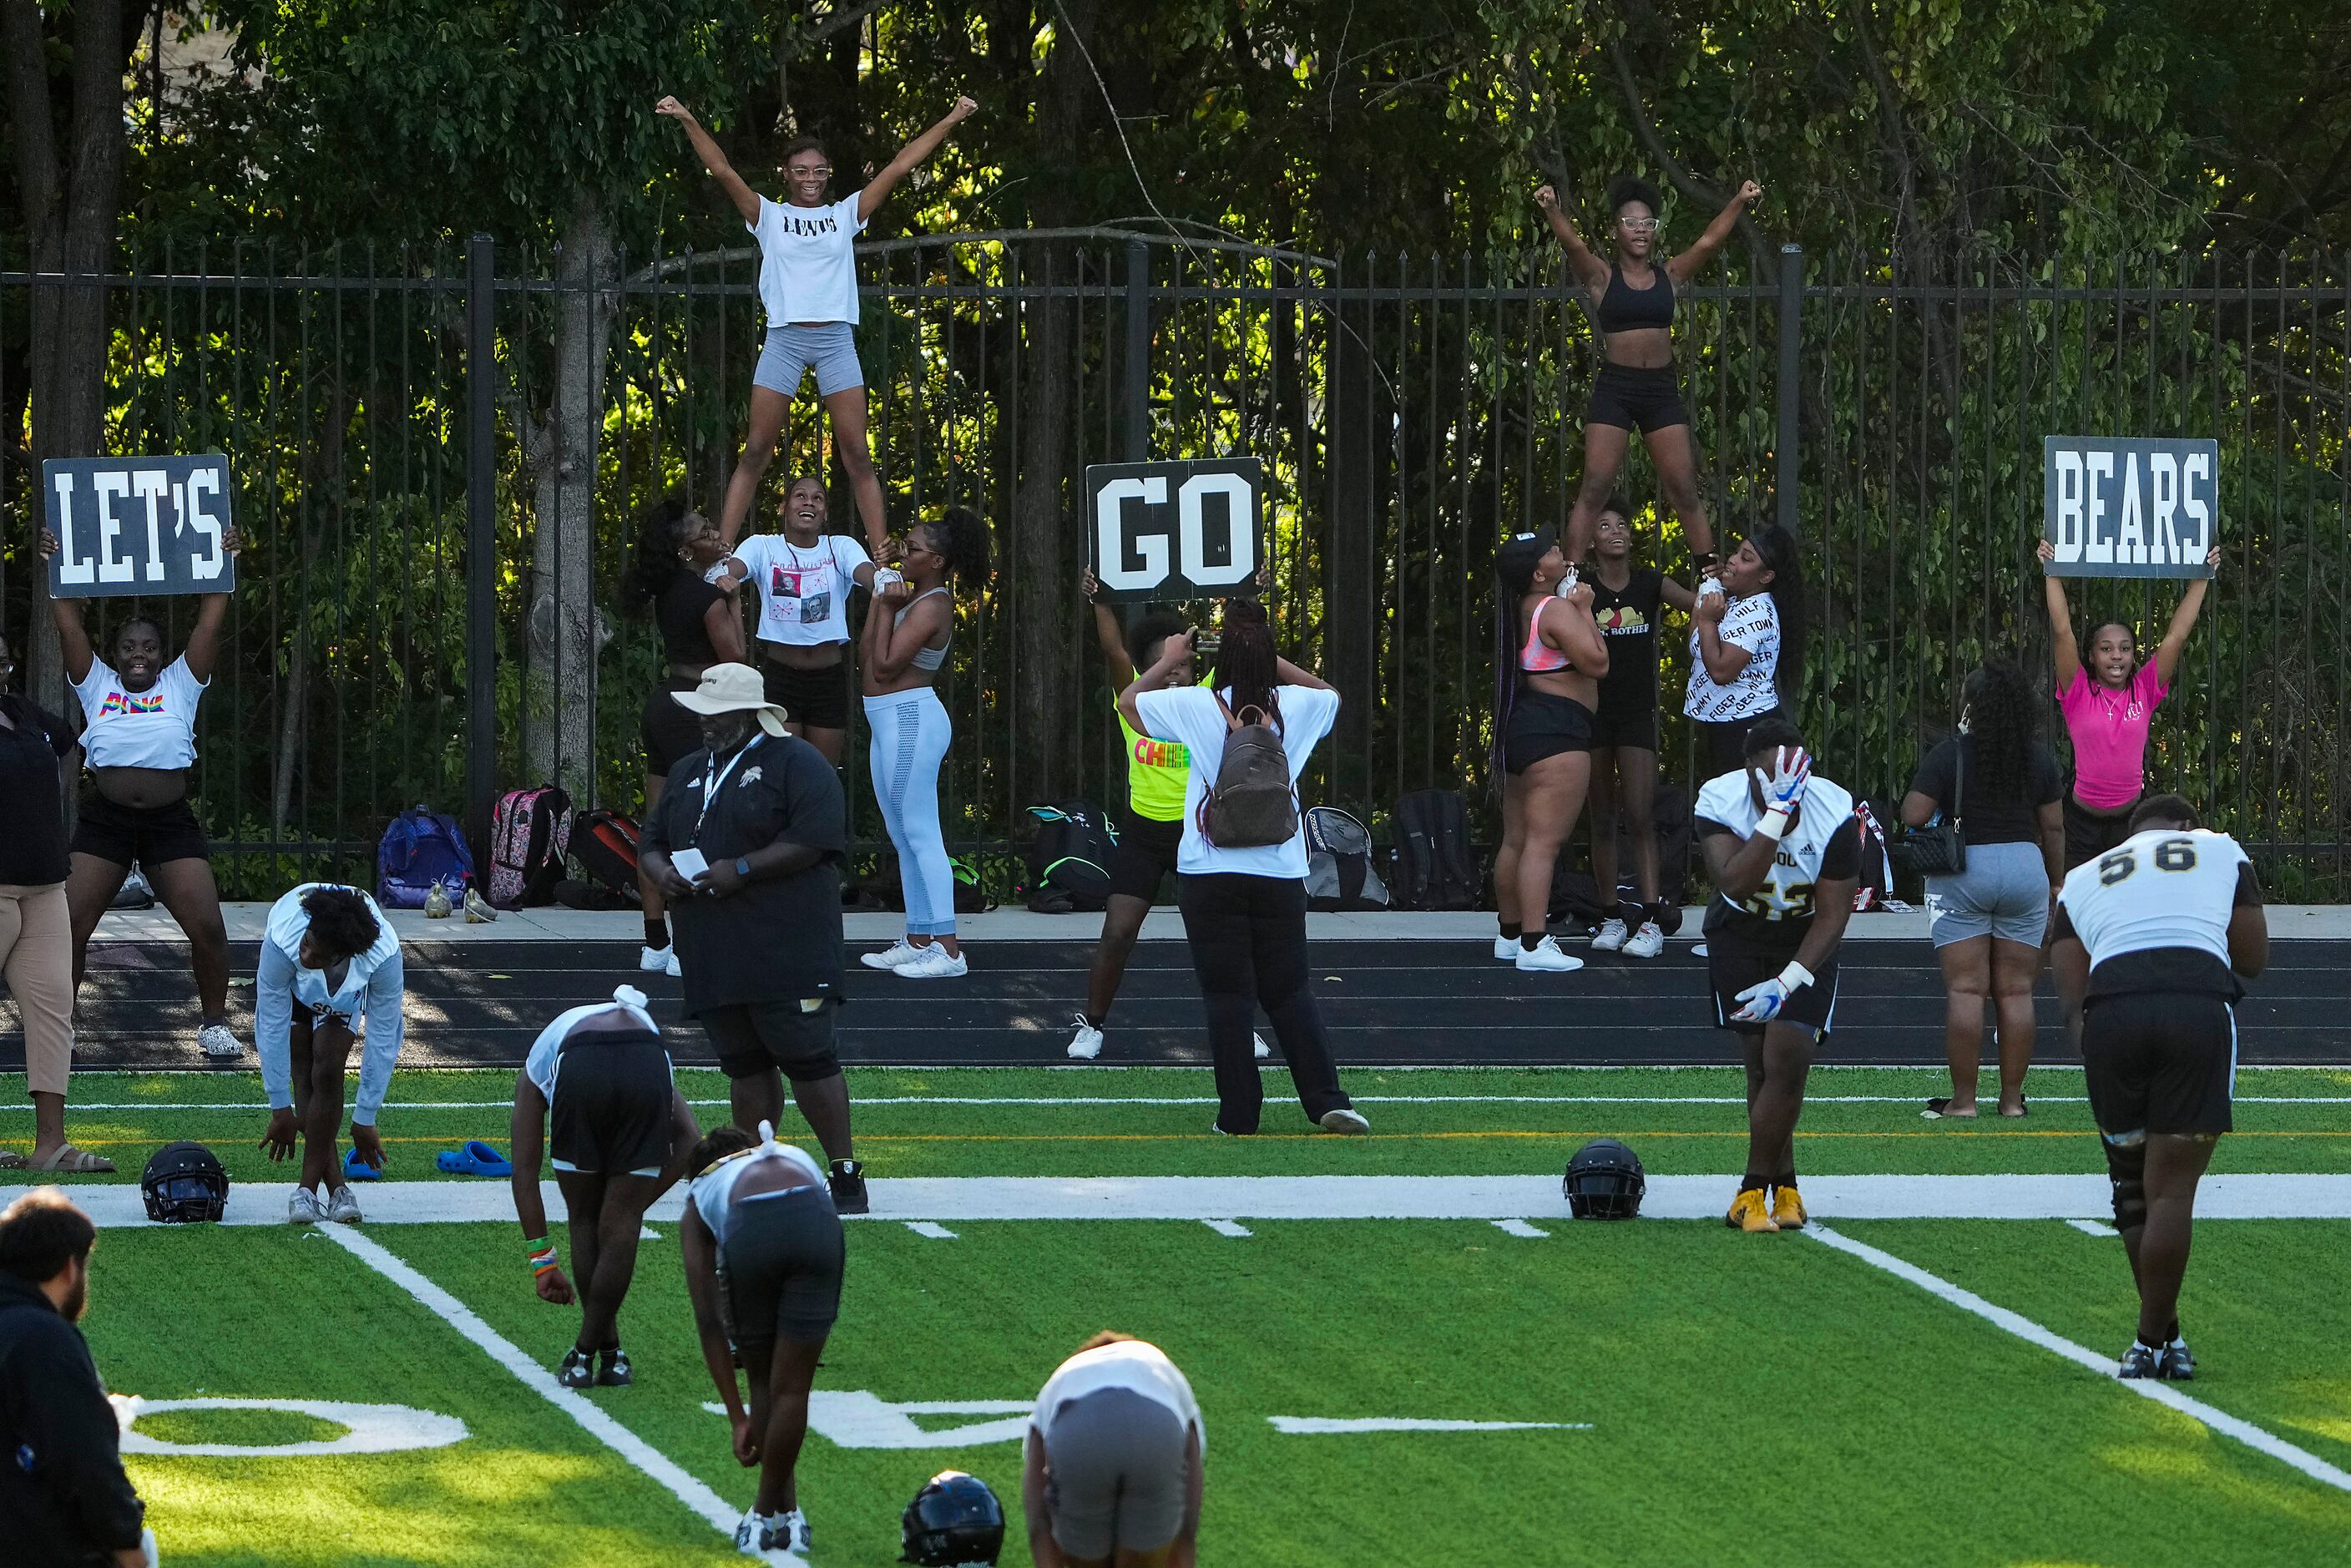 Cheerleaders chat “Let’s Go Bears” as players stretch during the first practice of the...